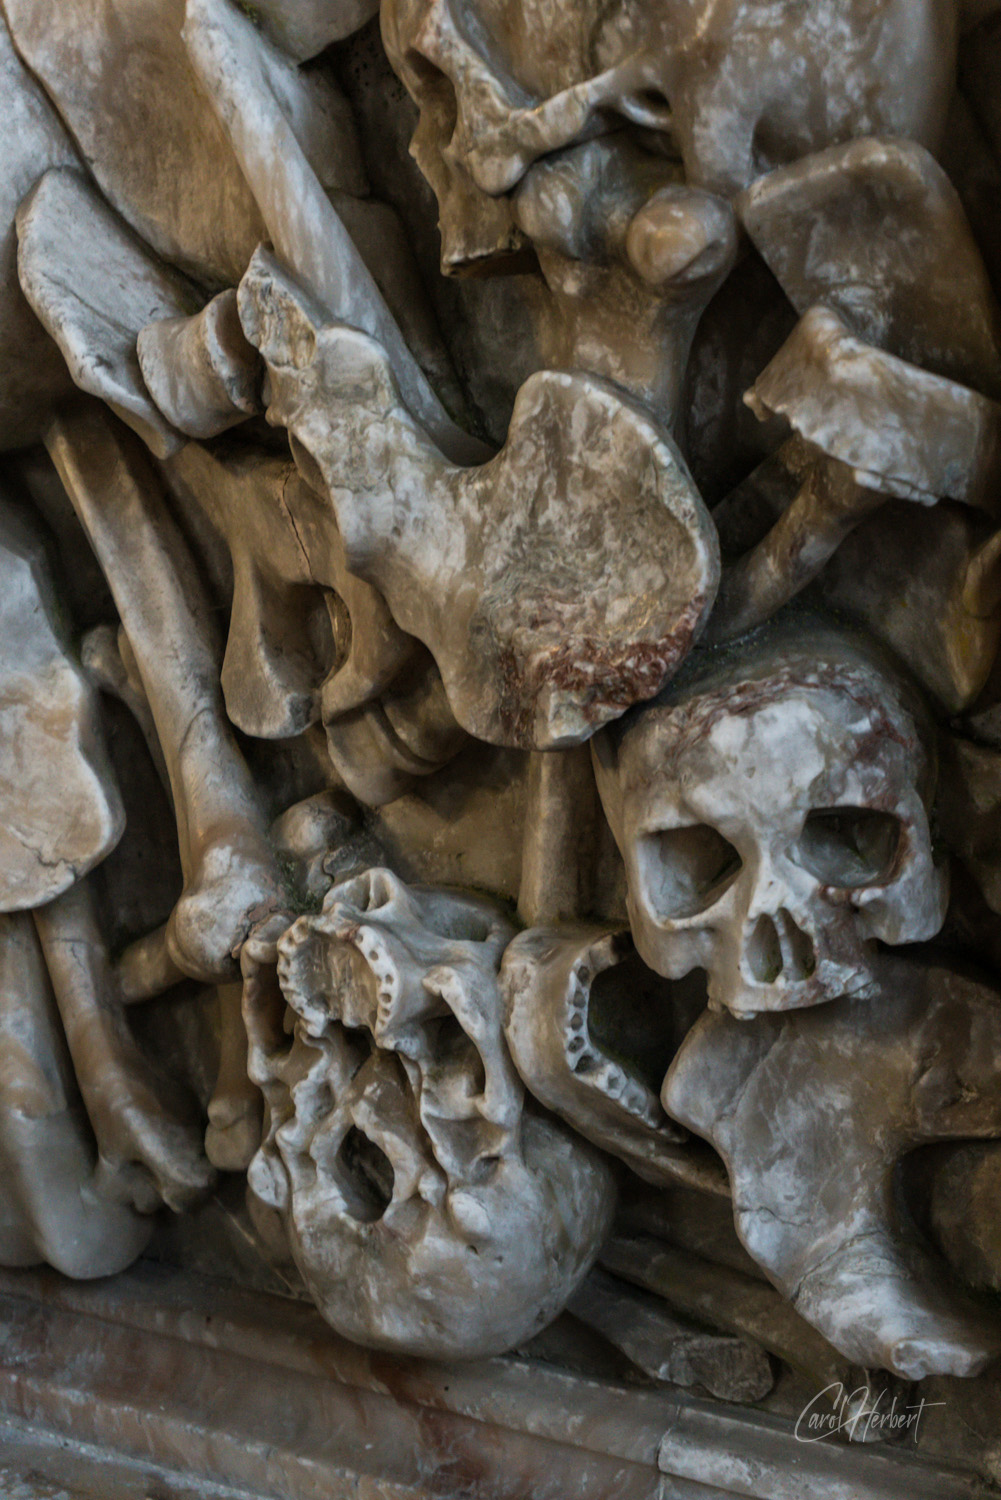 Photograph of skulls carved in marble